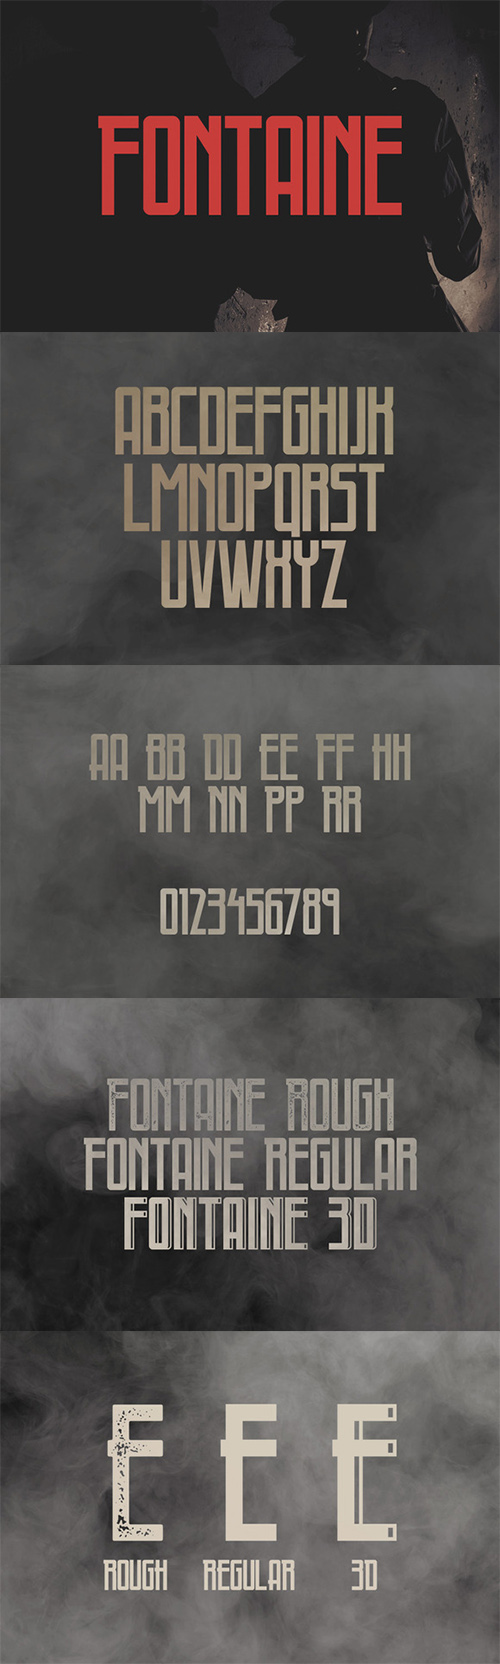 Fontaine Typeface